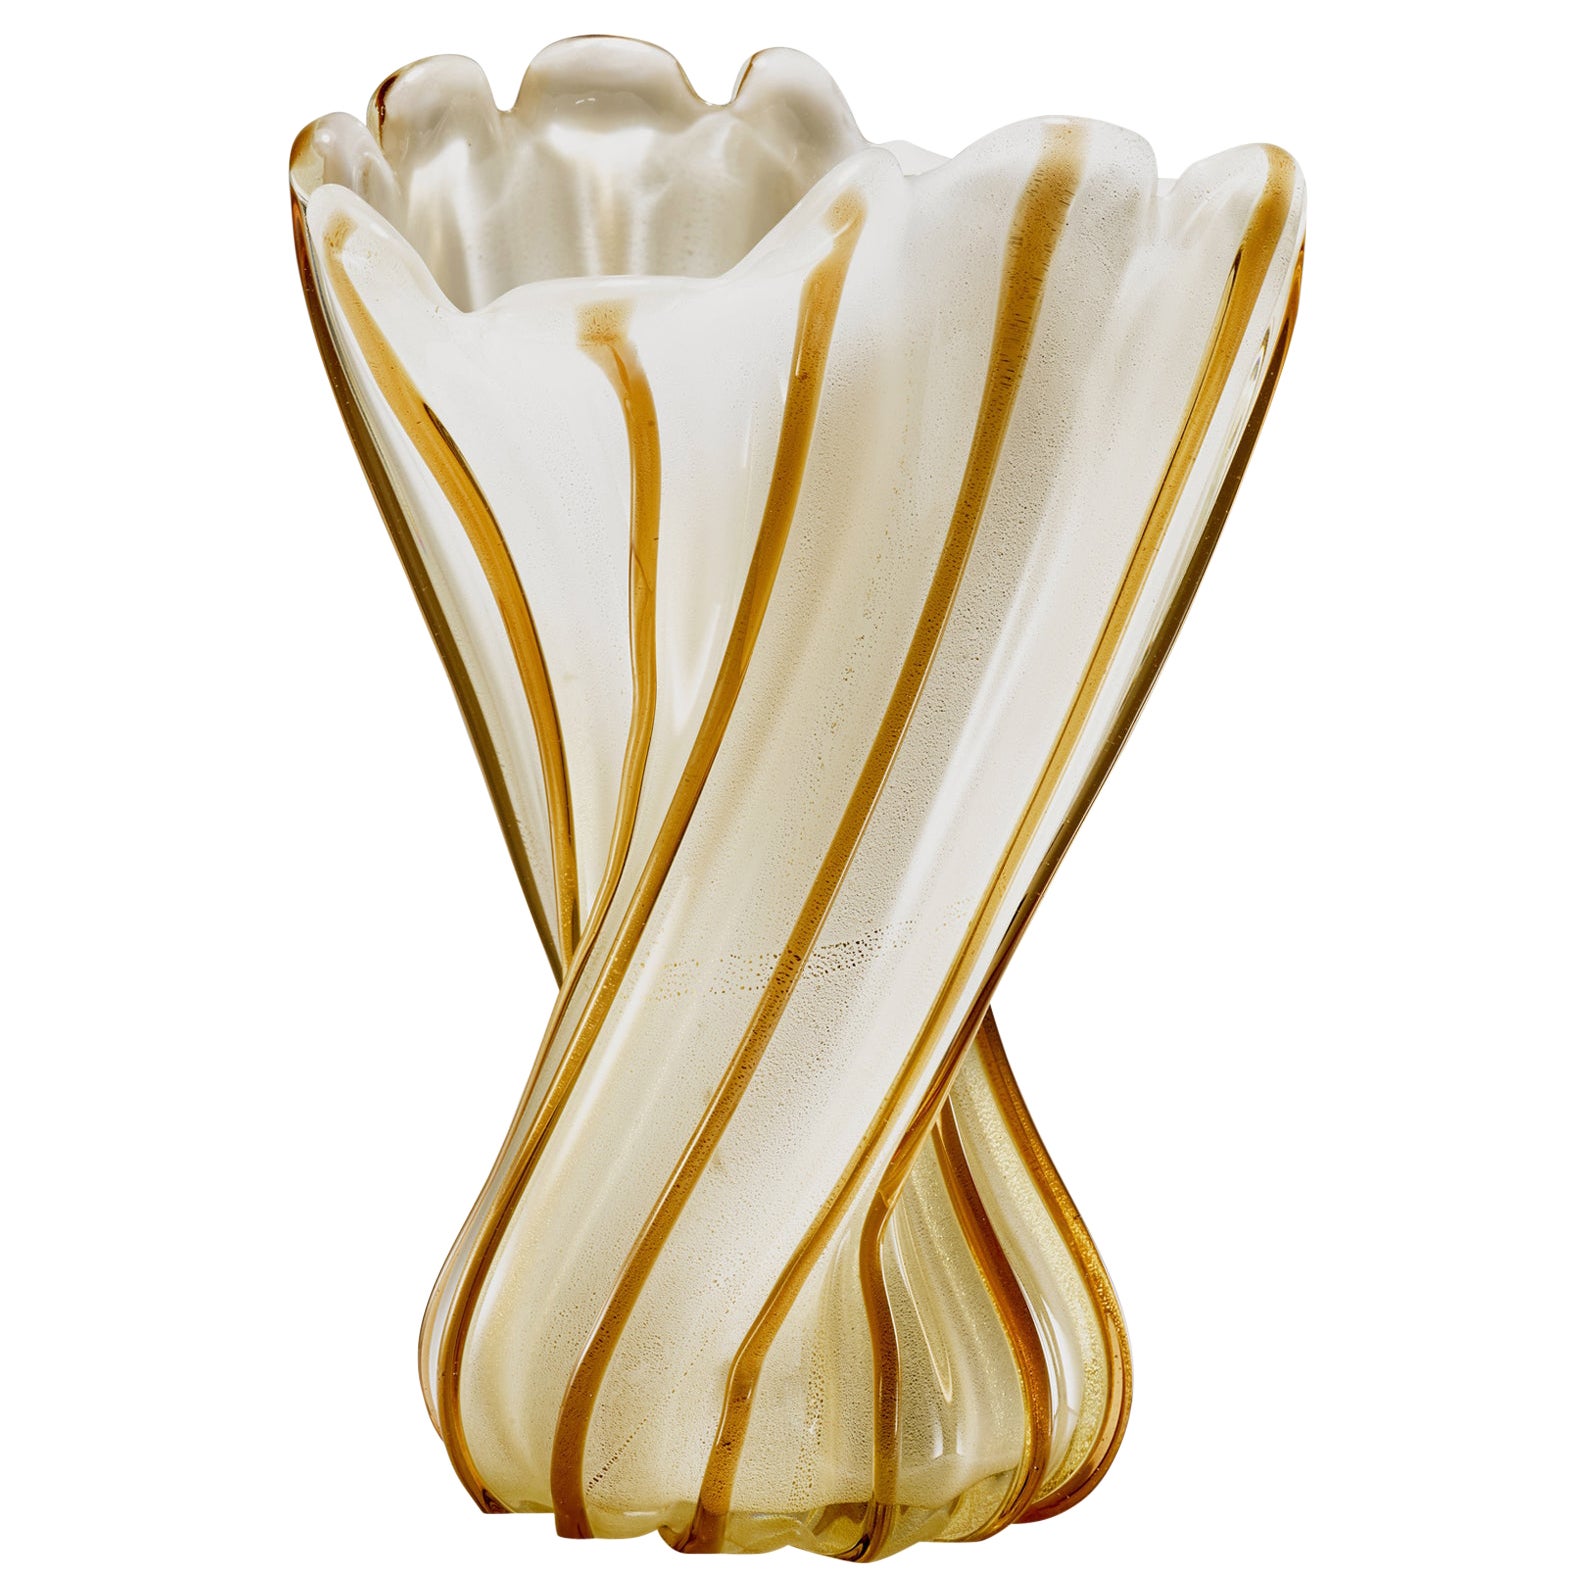 Ritorto Vase with Gold Leaf by Archimede Seguso Murano 1955 For Sale